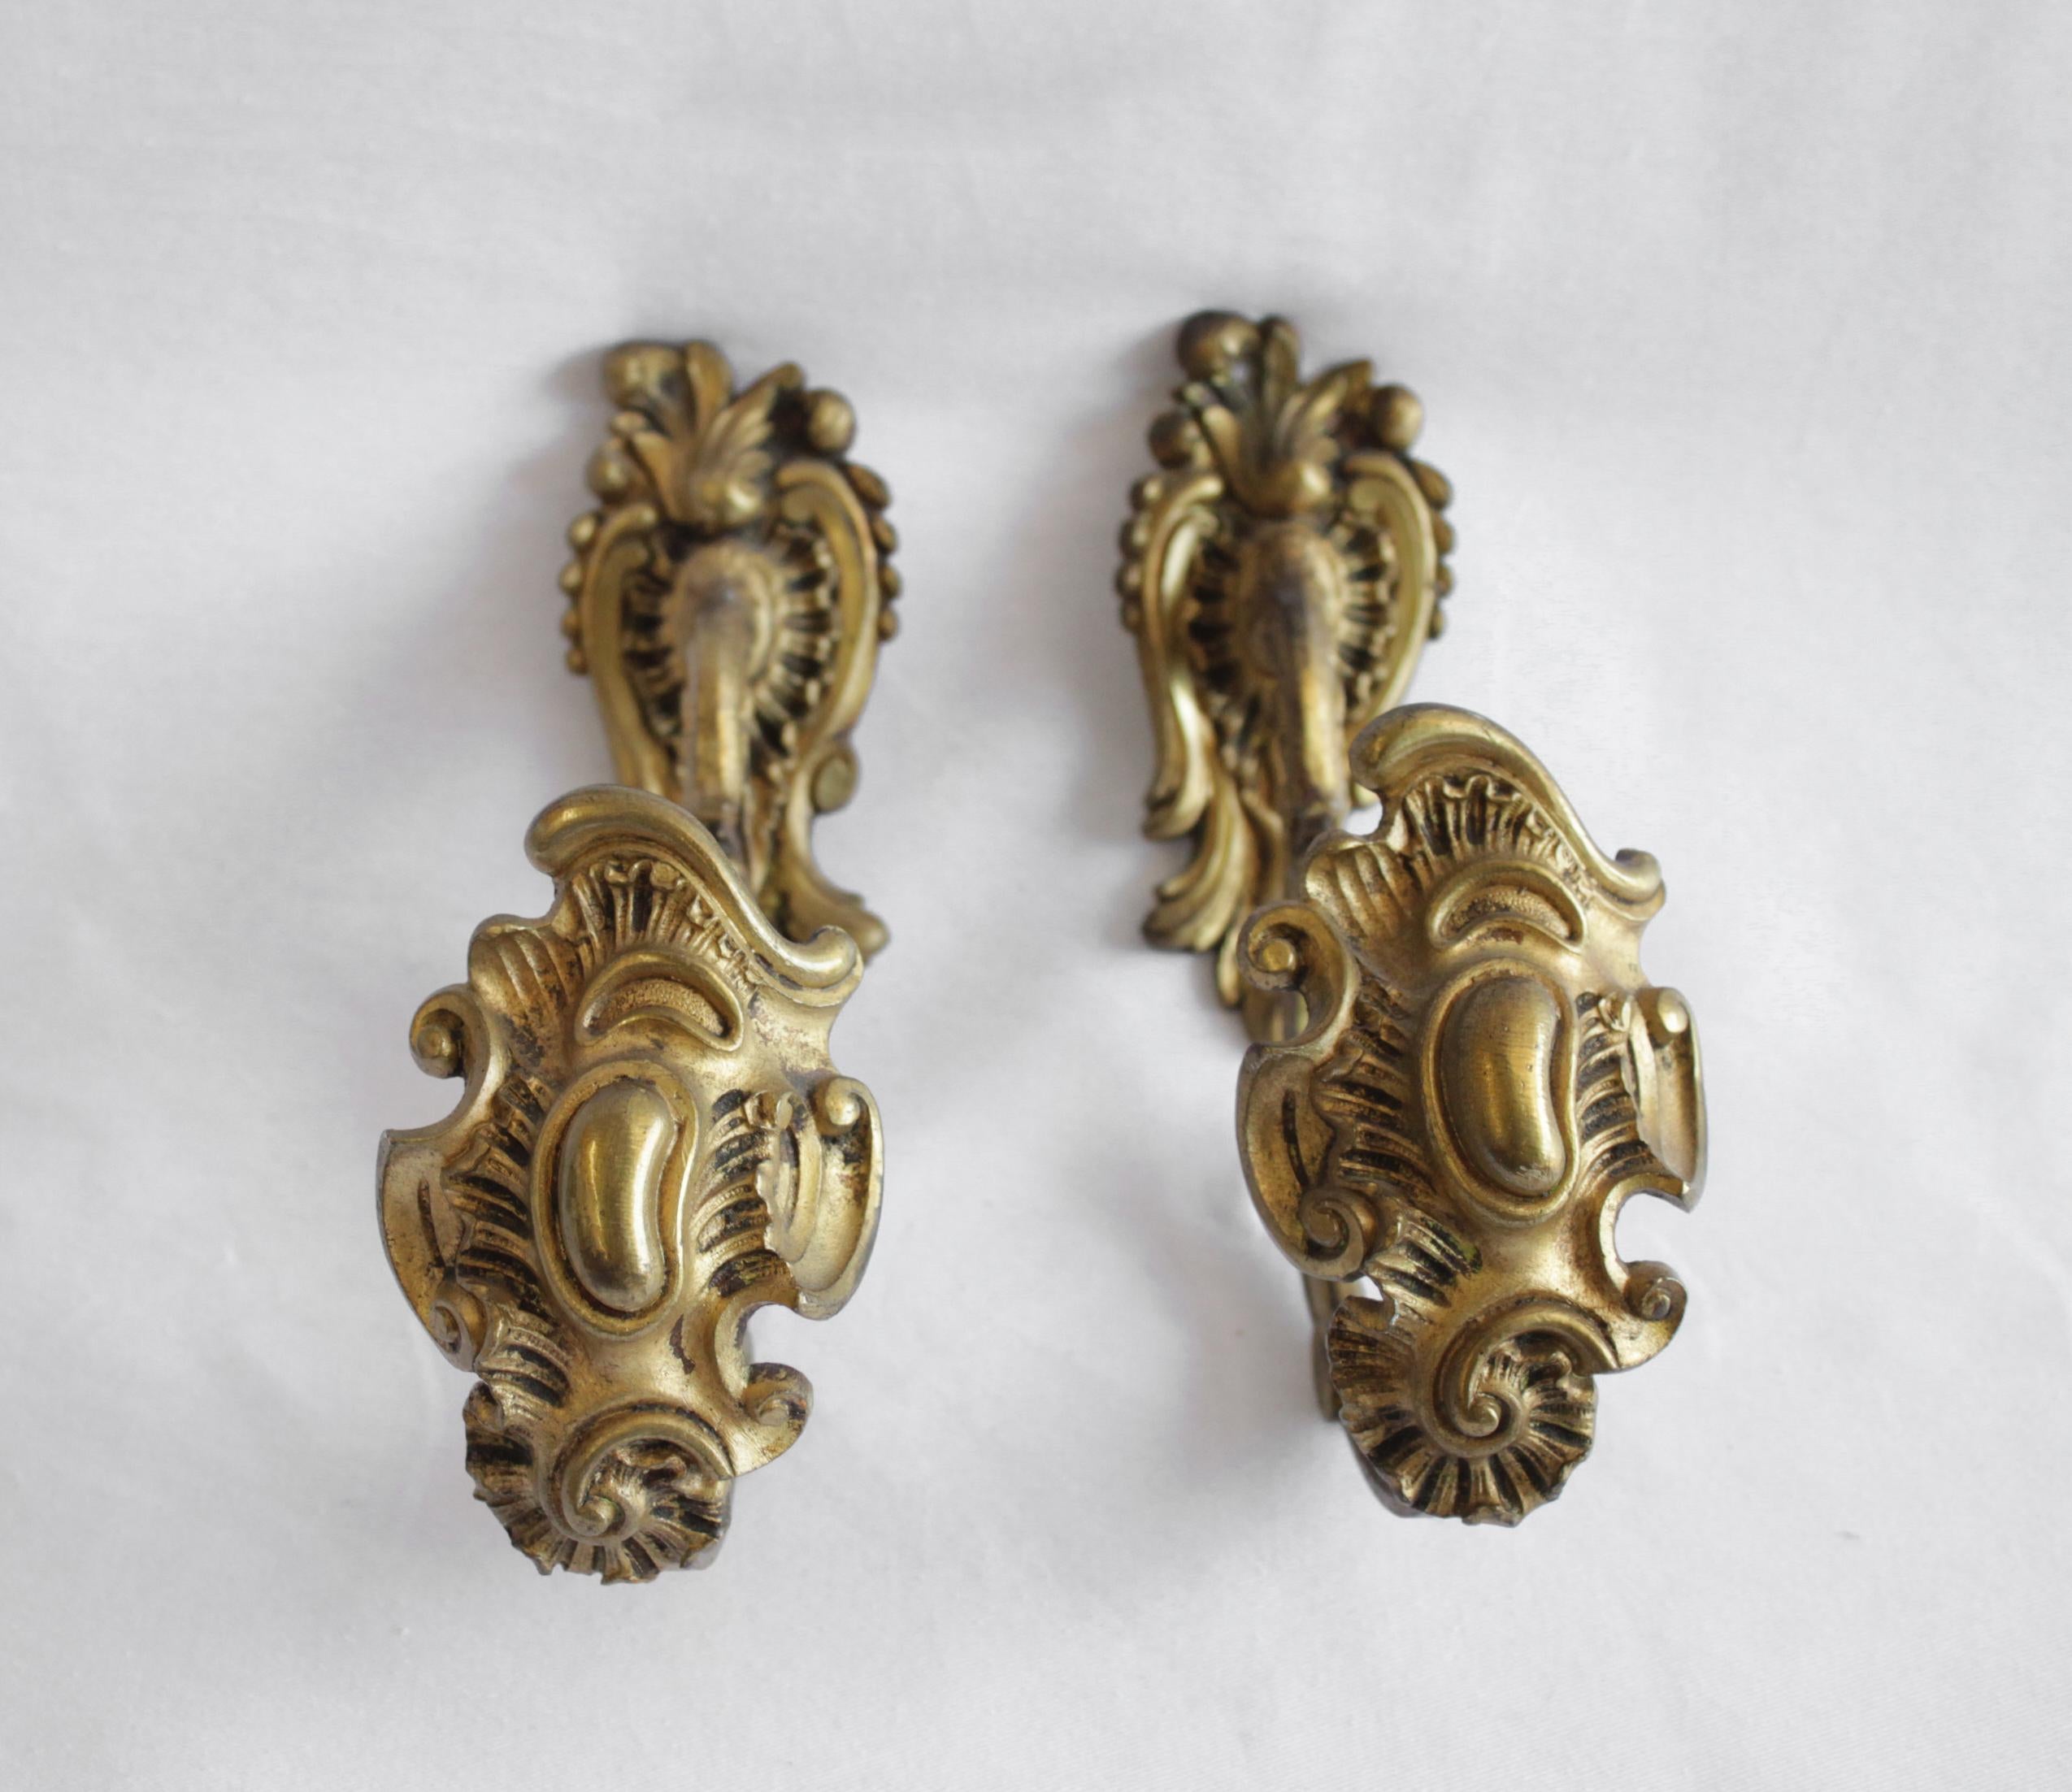 Antique brass curtain tie backs in Rococo style.
These easily attach to the wall with a couple screws.
French, circa 19th century
Measures: 3.25